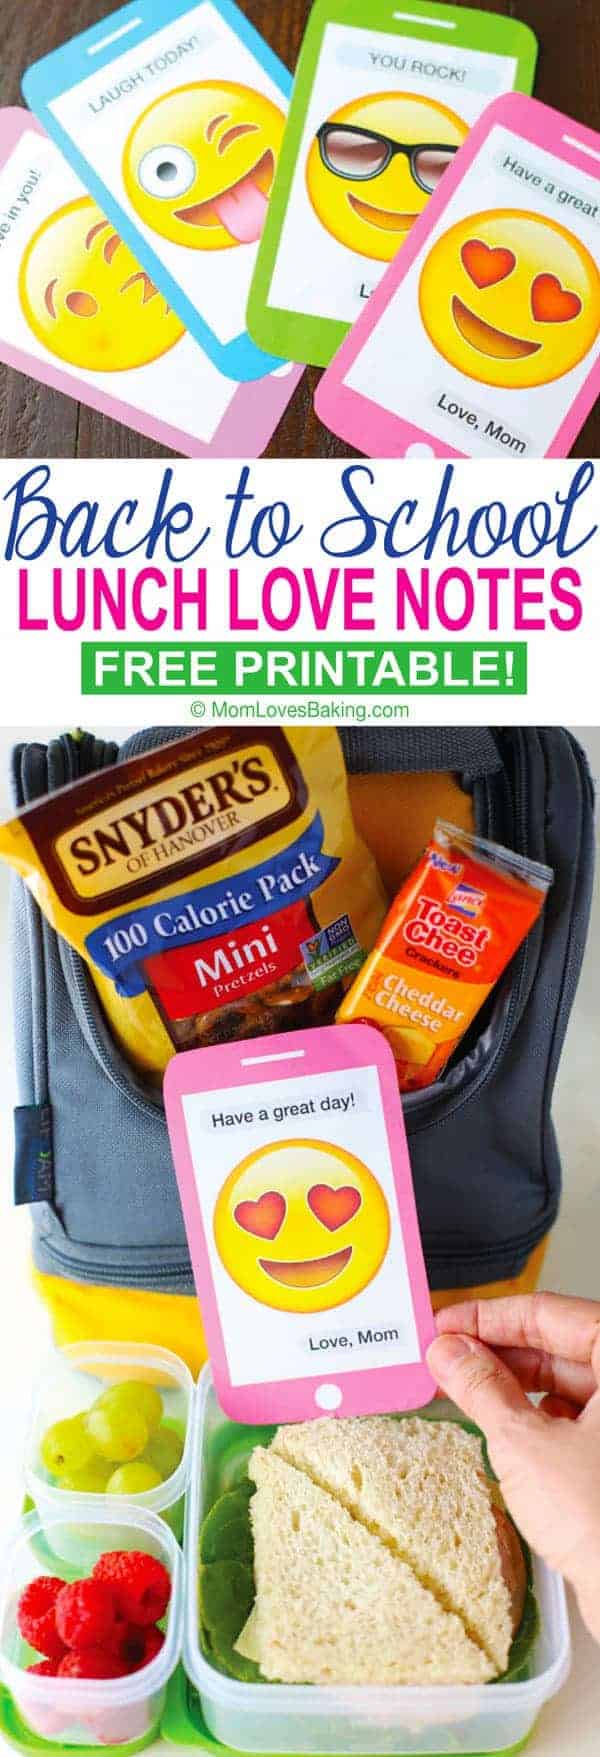 https://www.momlovesbaking.com/wp-content/uploads/2017/07/Back-To-School-Lunch-Love-Notes-Long2.jpg